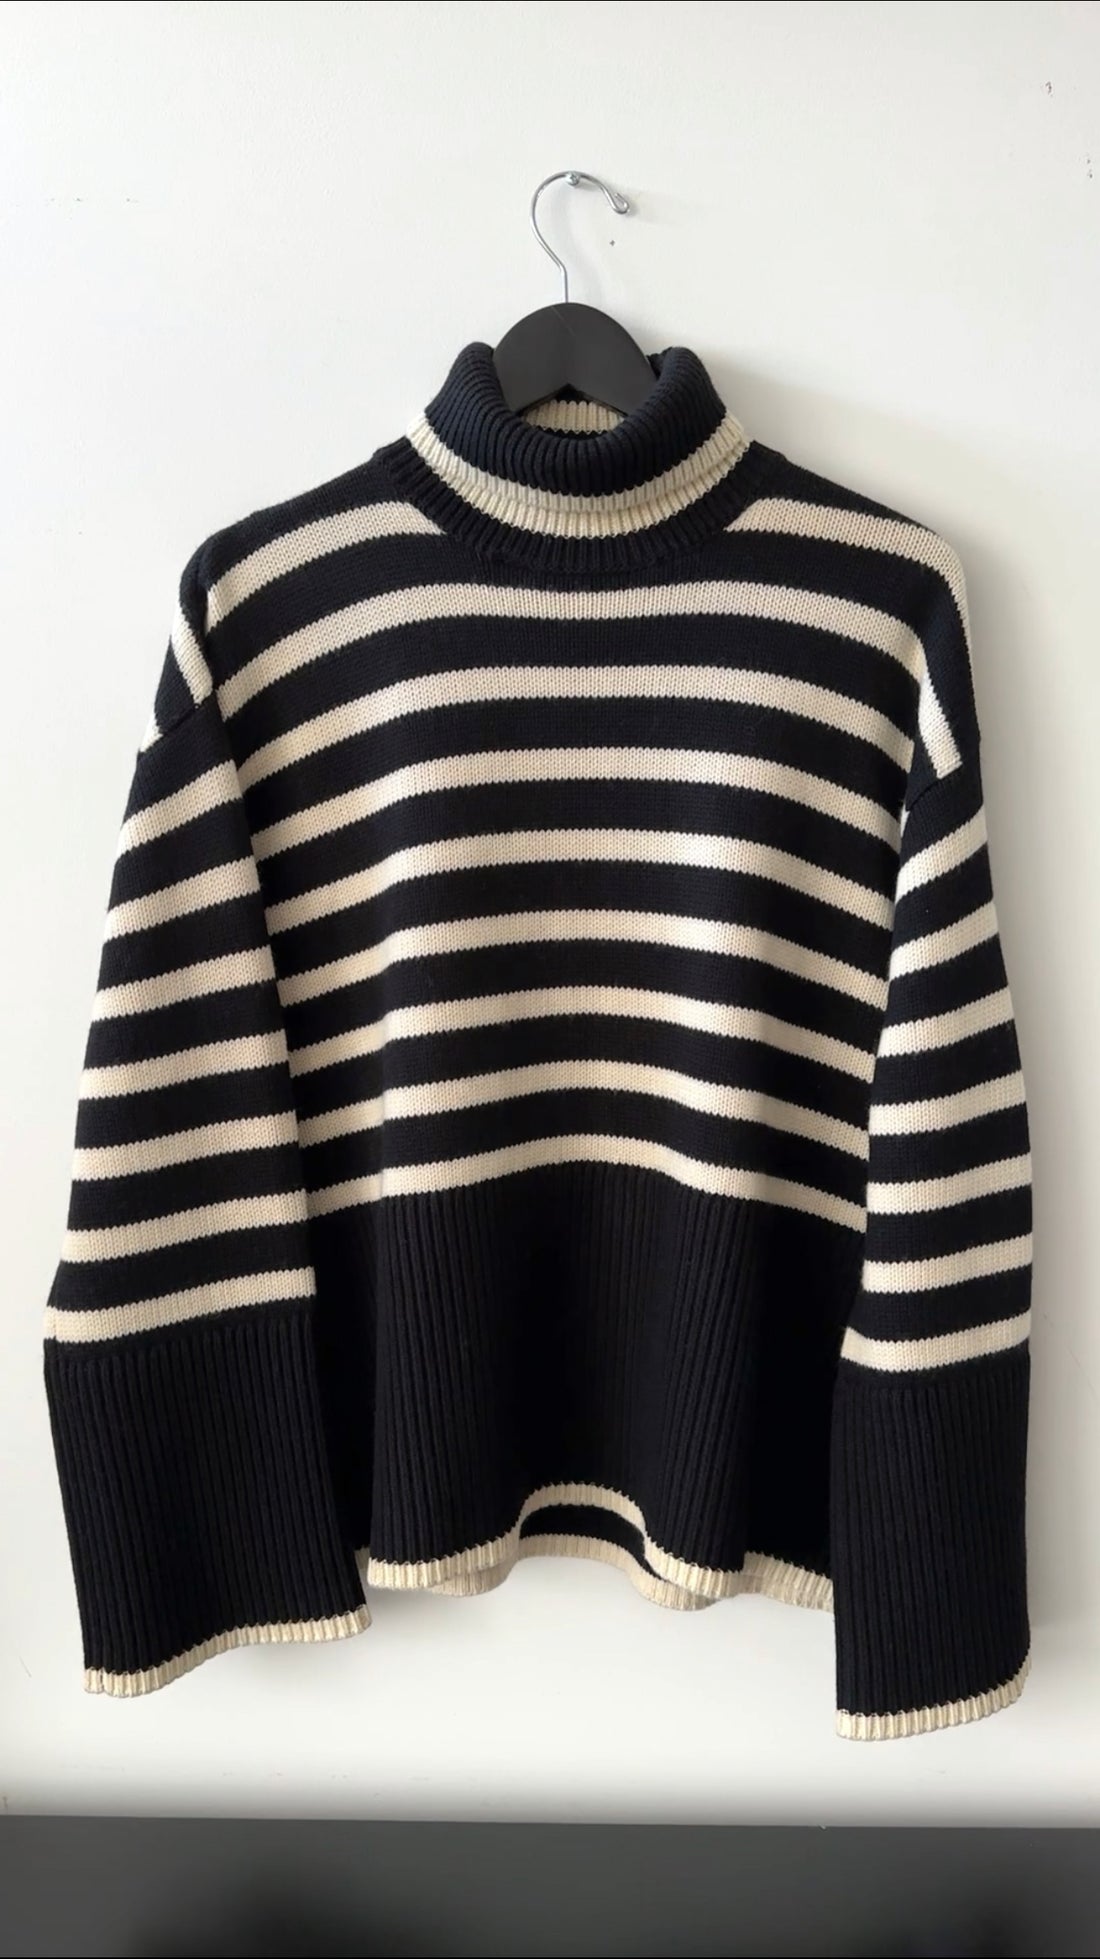 Toteme Signature Stripe Turtleneck in Black and Ivory - XS / S